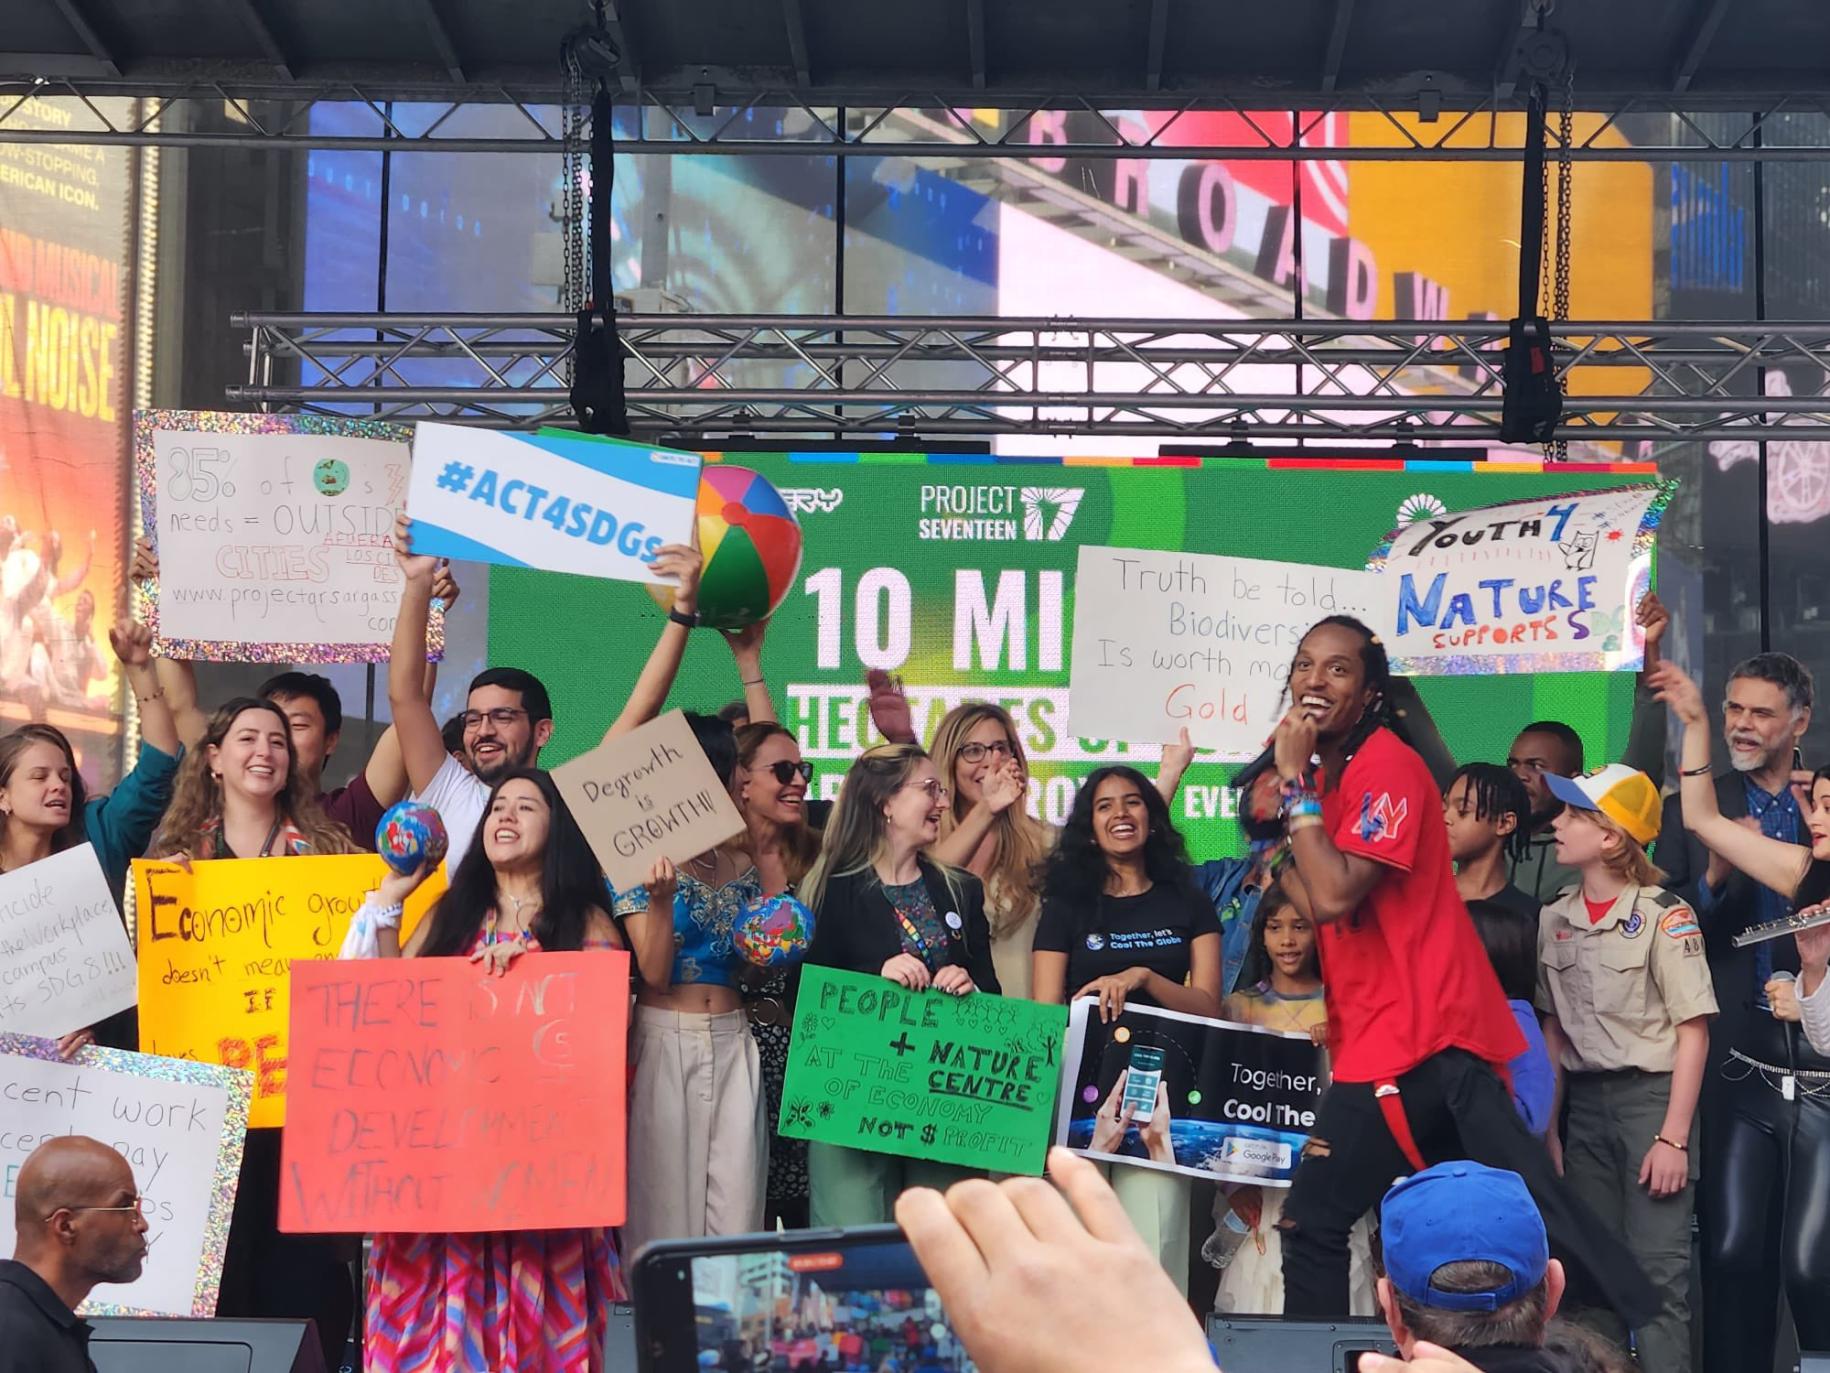 group of people on stage holding colourful posters 